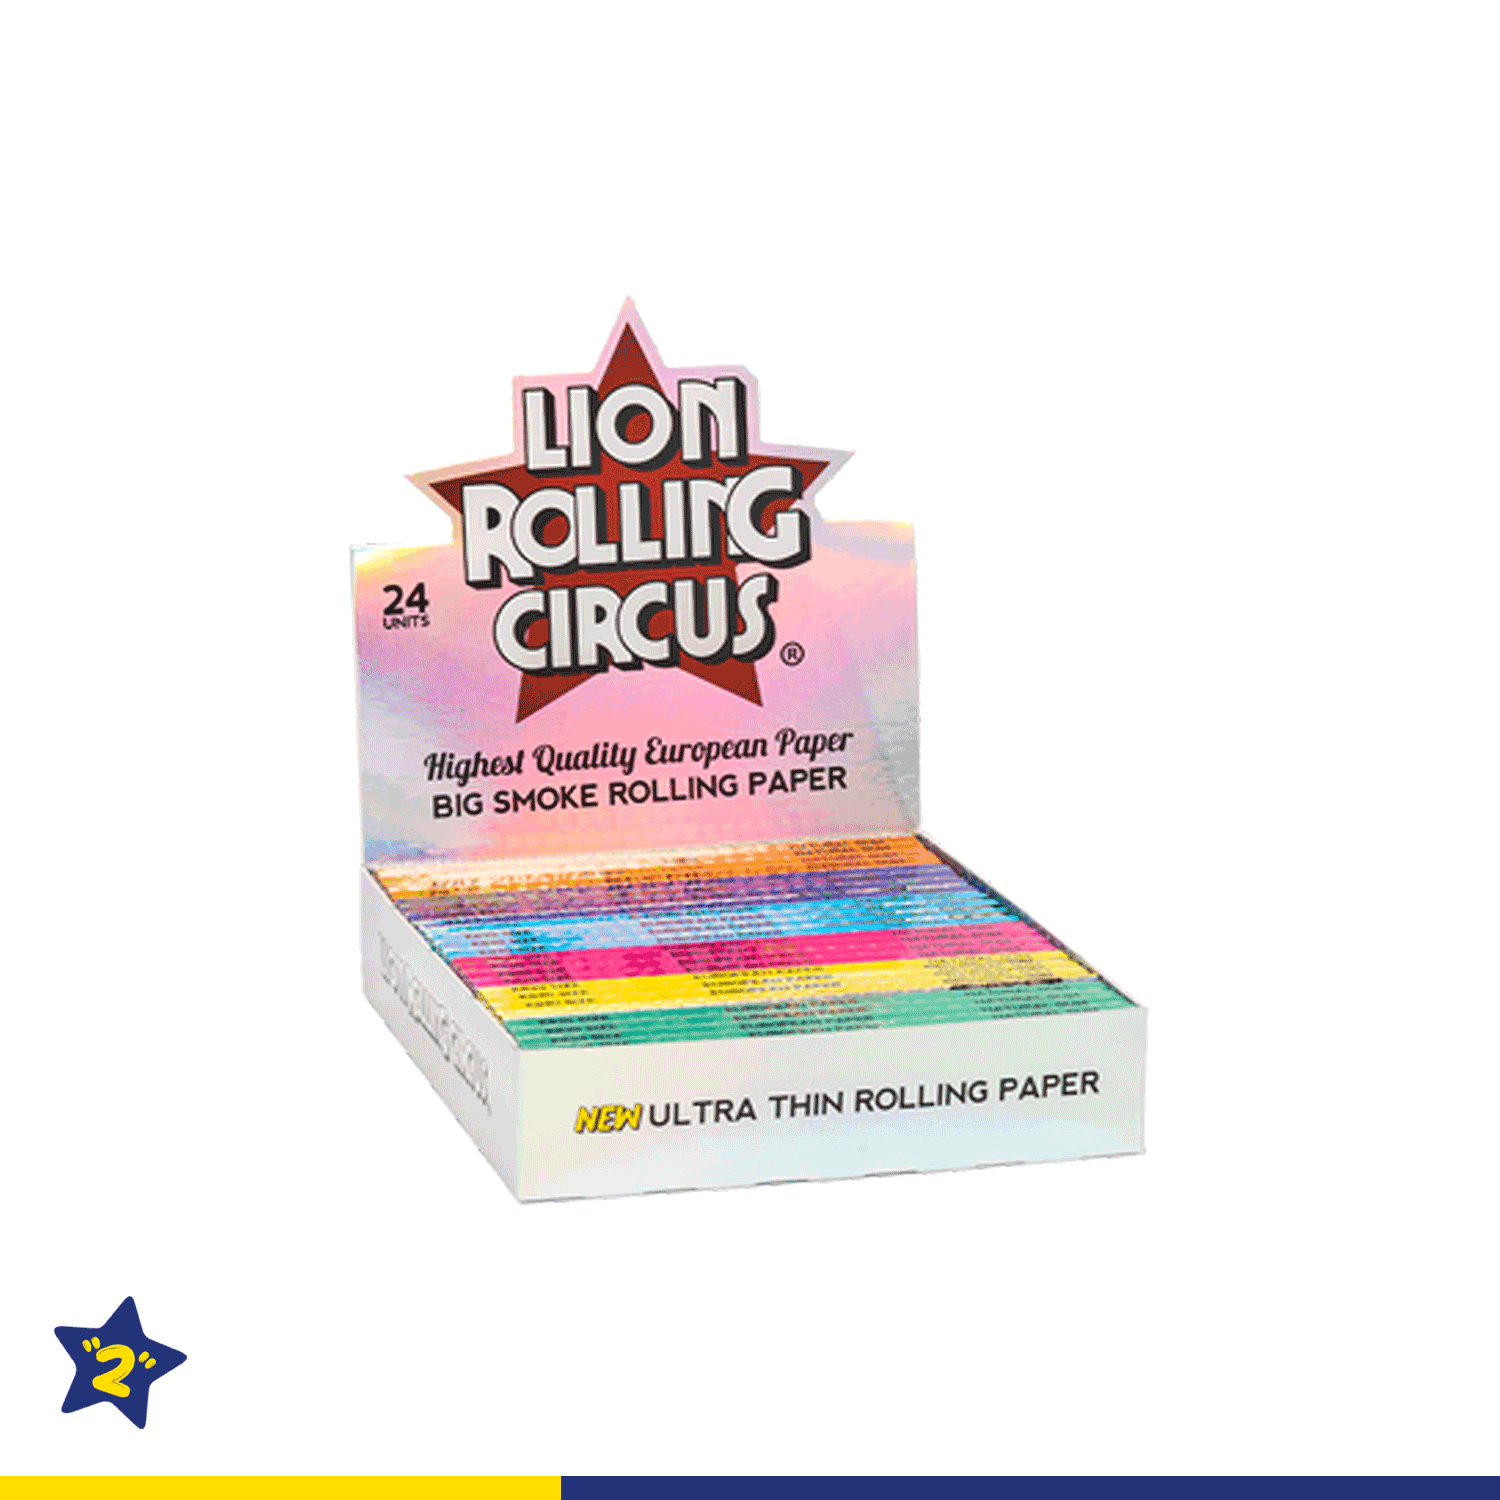 Lion Rolling Circus Ultra Thin King Size Rolling Paper